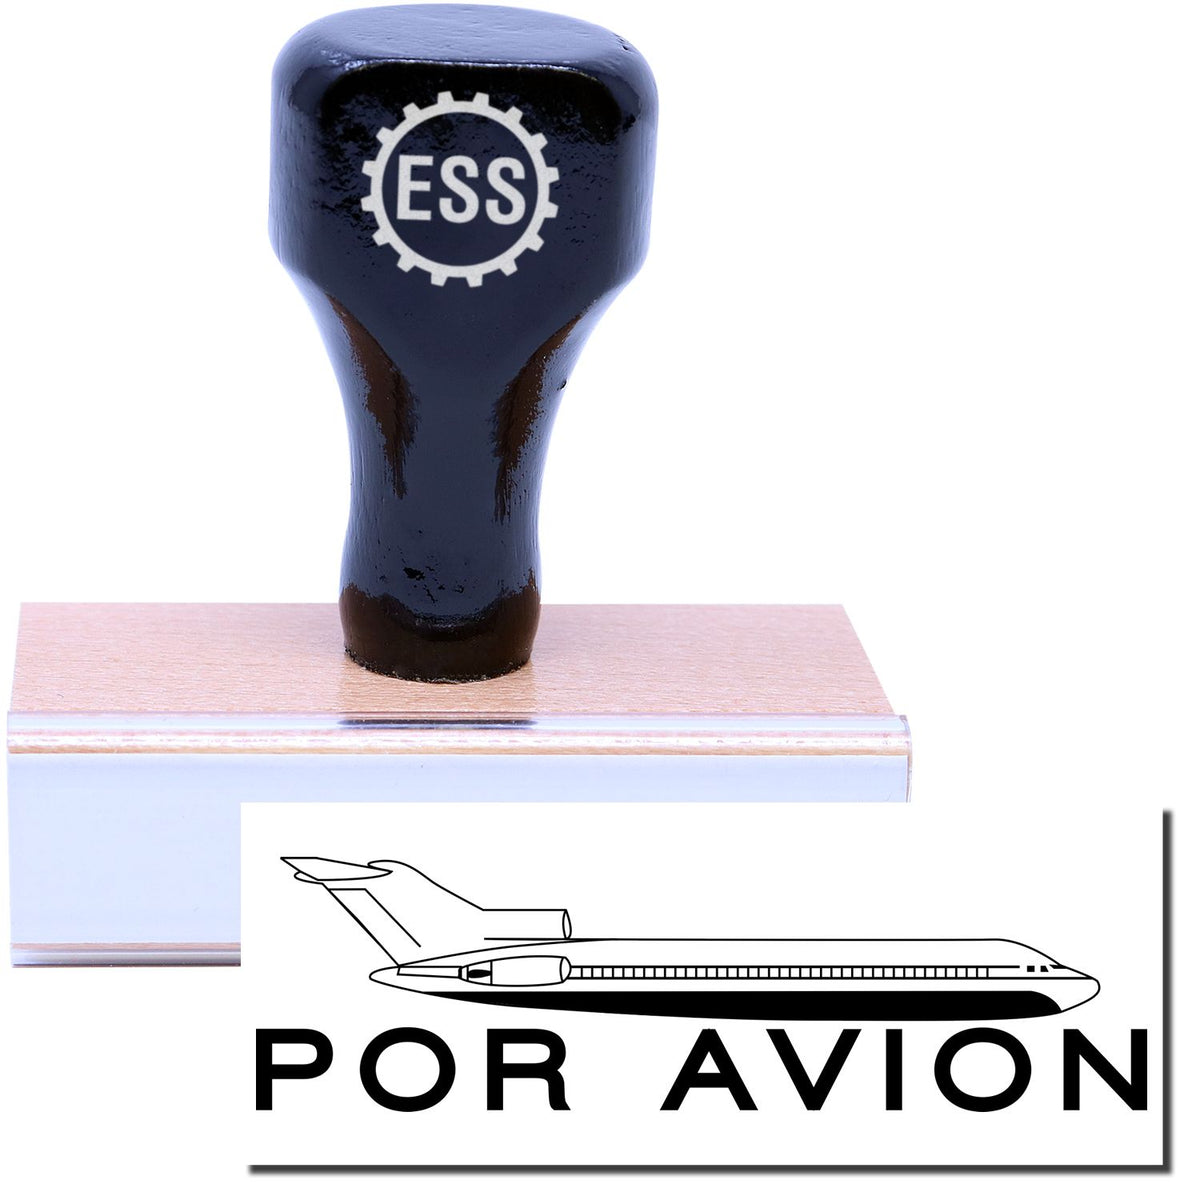 A stock office rubber stamp with a stamped image showing how the text &quot;POR AVION&quot; in a large bold font with an airplane icon above the text is displayed after stamping.